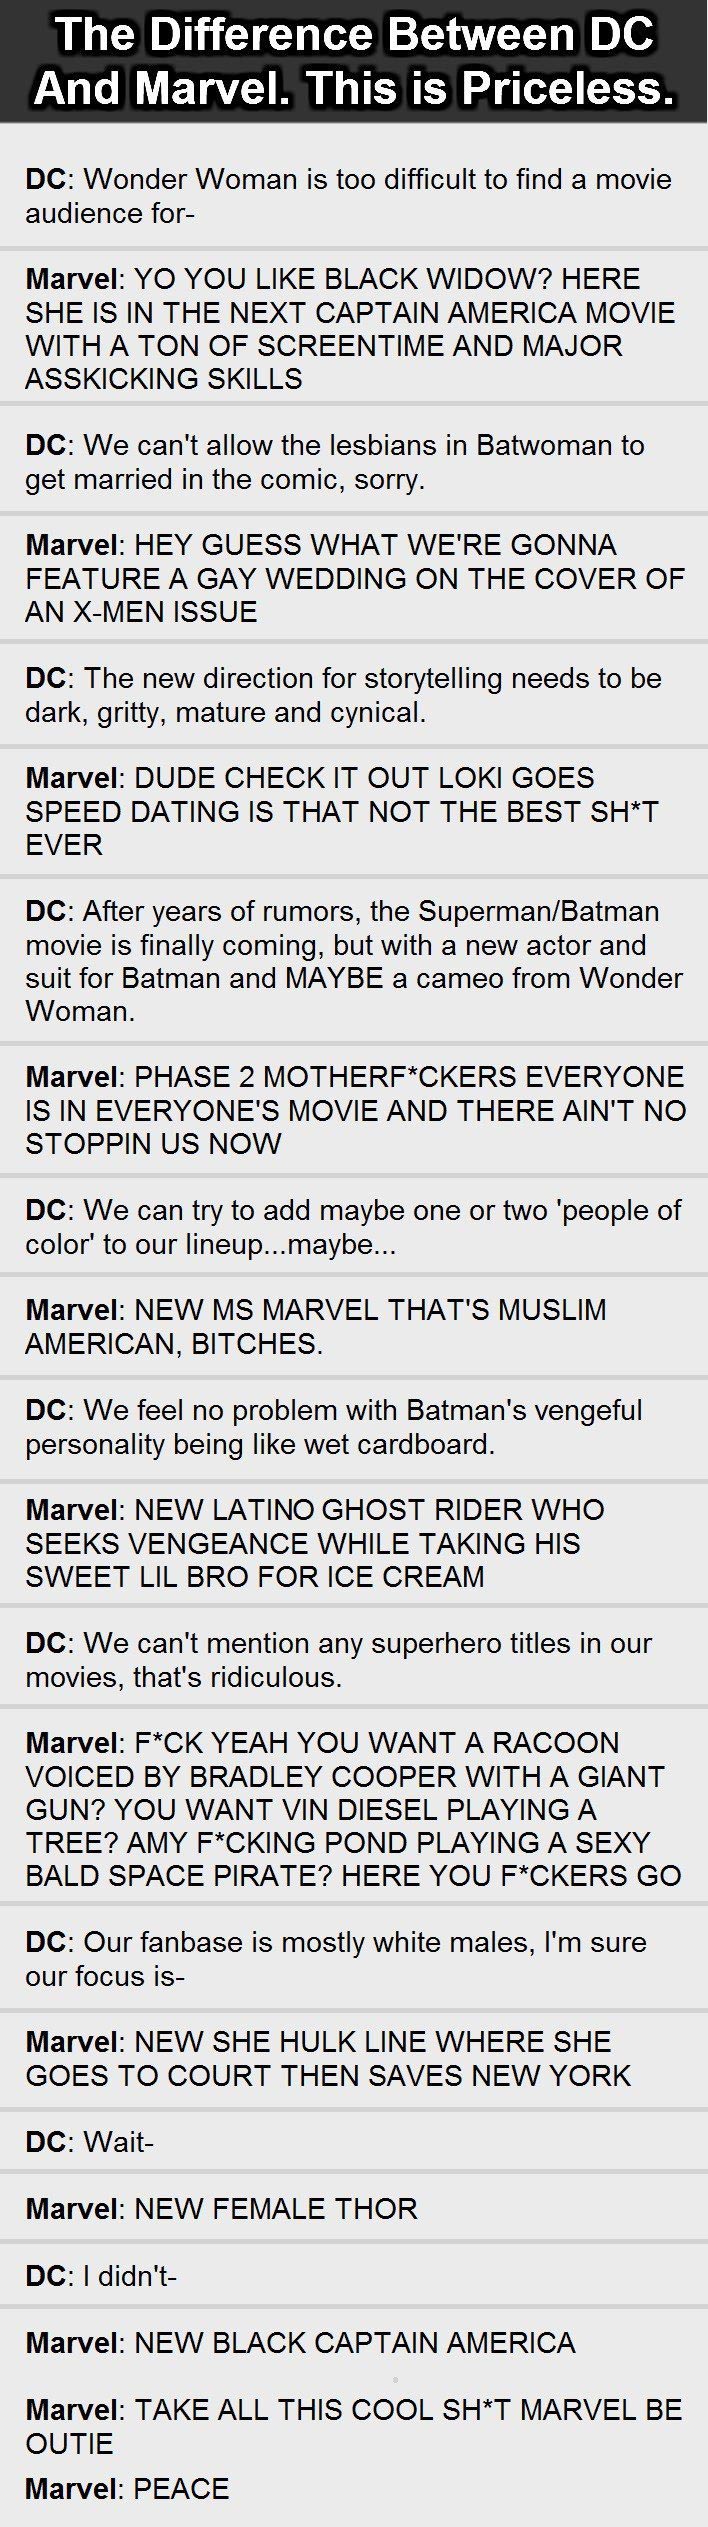 The Difference Between DC and Marvel